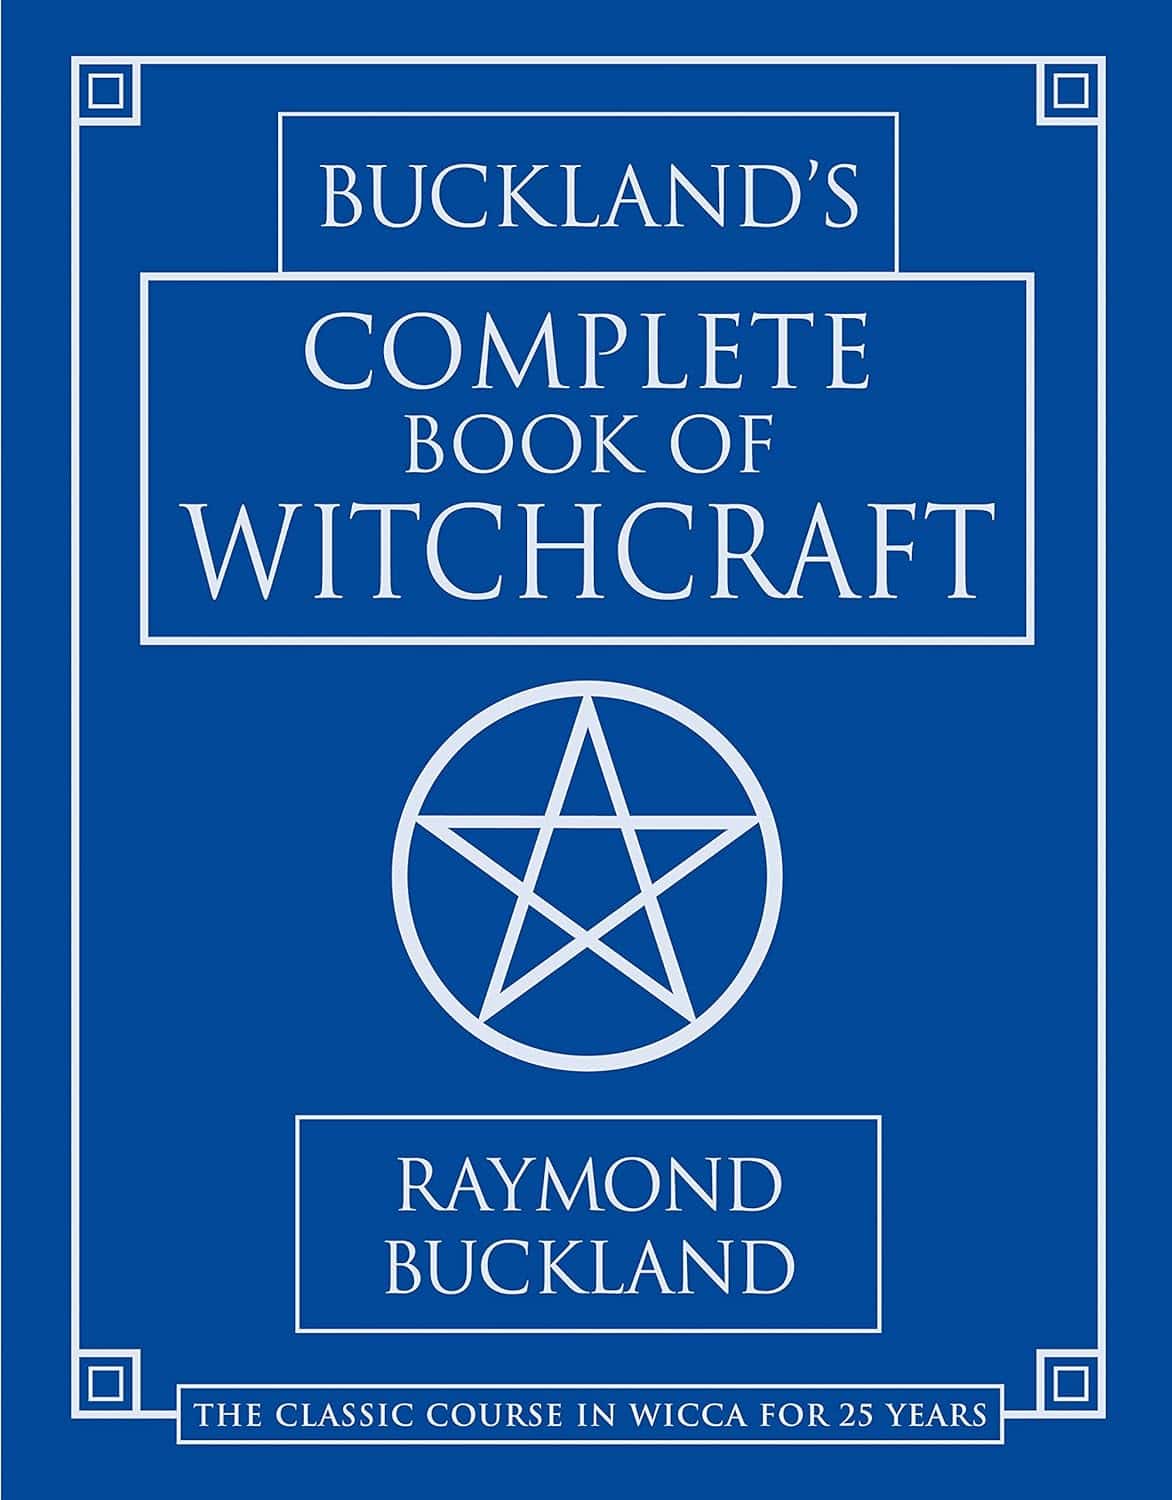 Complete Book of Witchcraft by Raymond Buckland